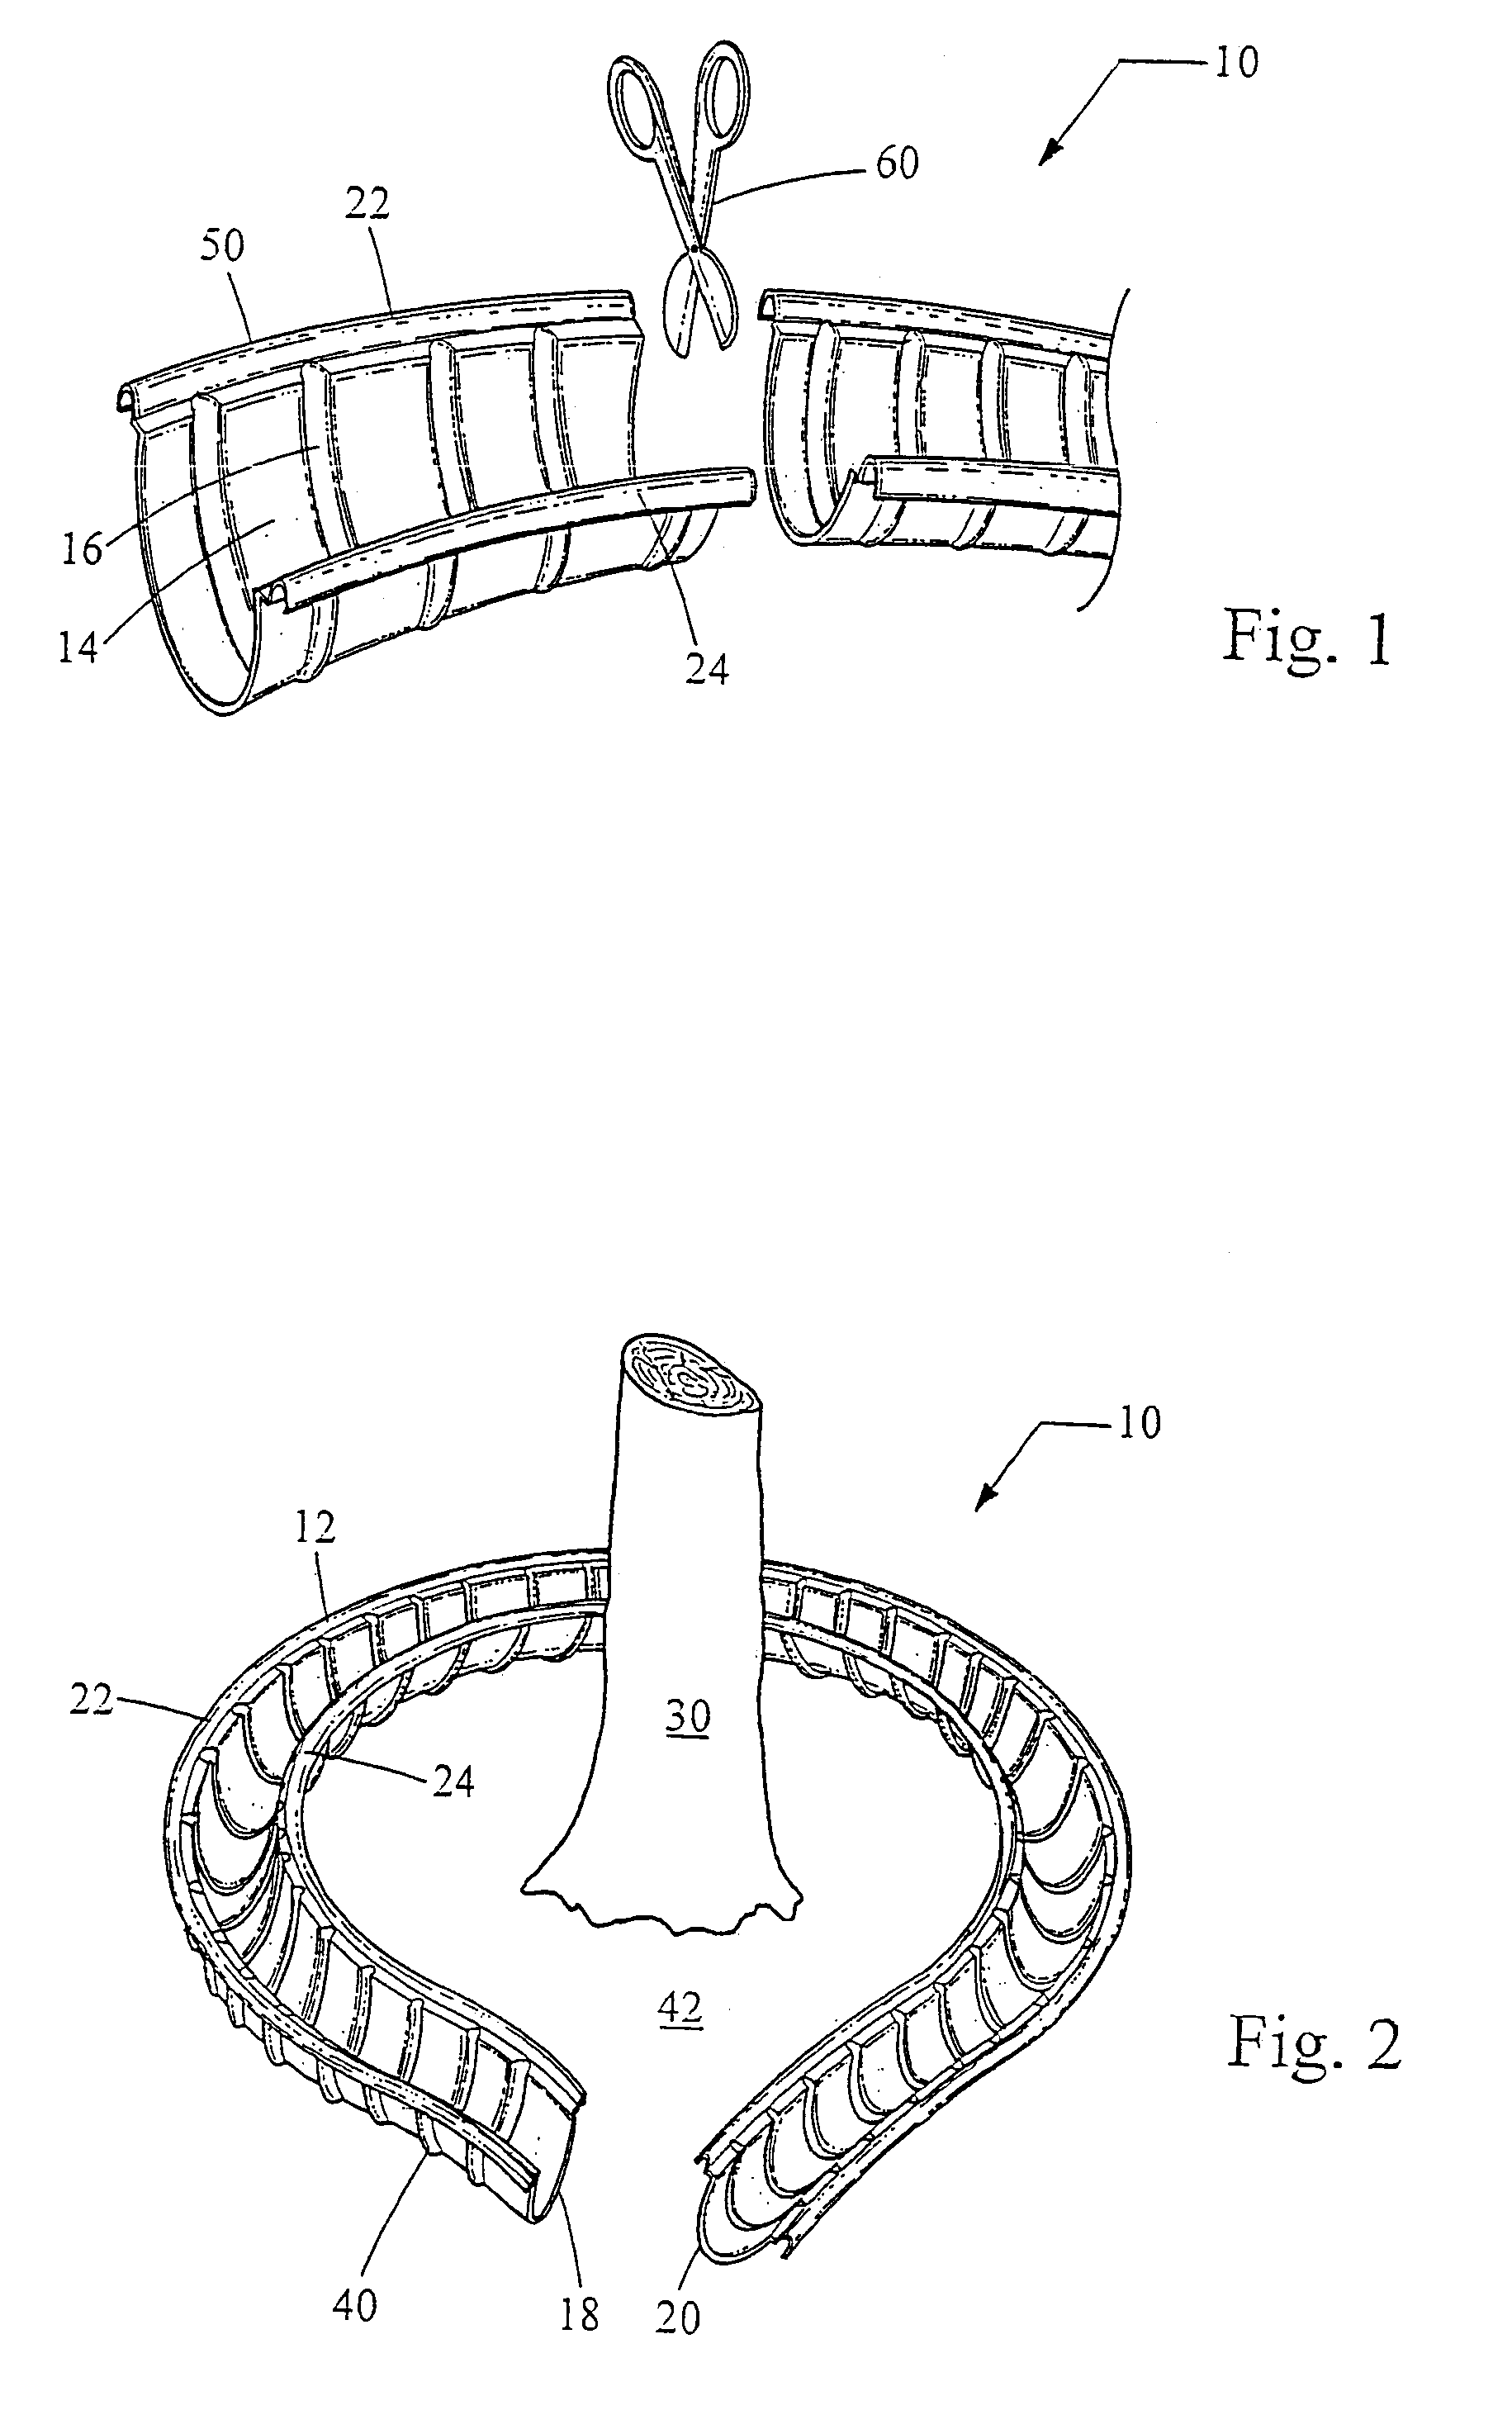 Planting receptacle assembly and a method for planting